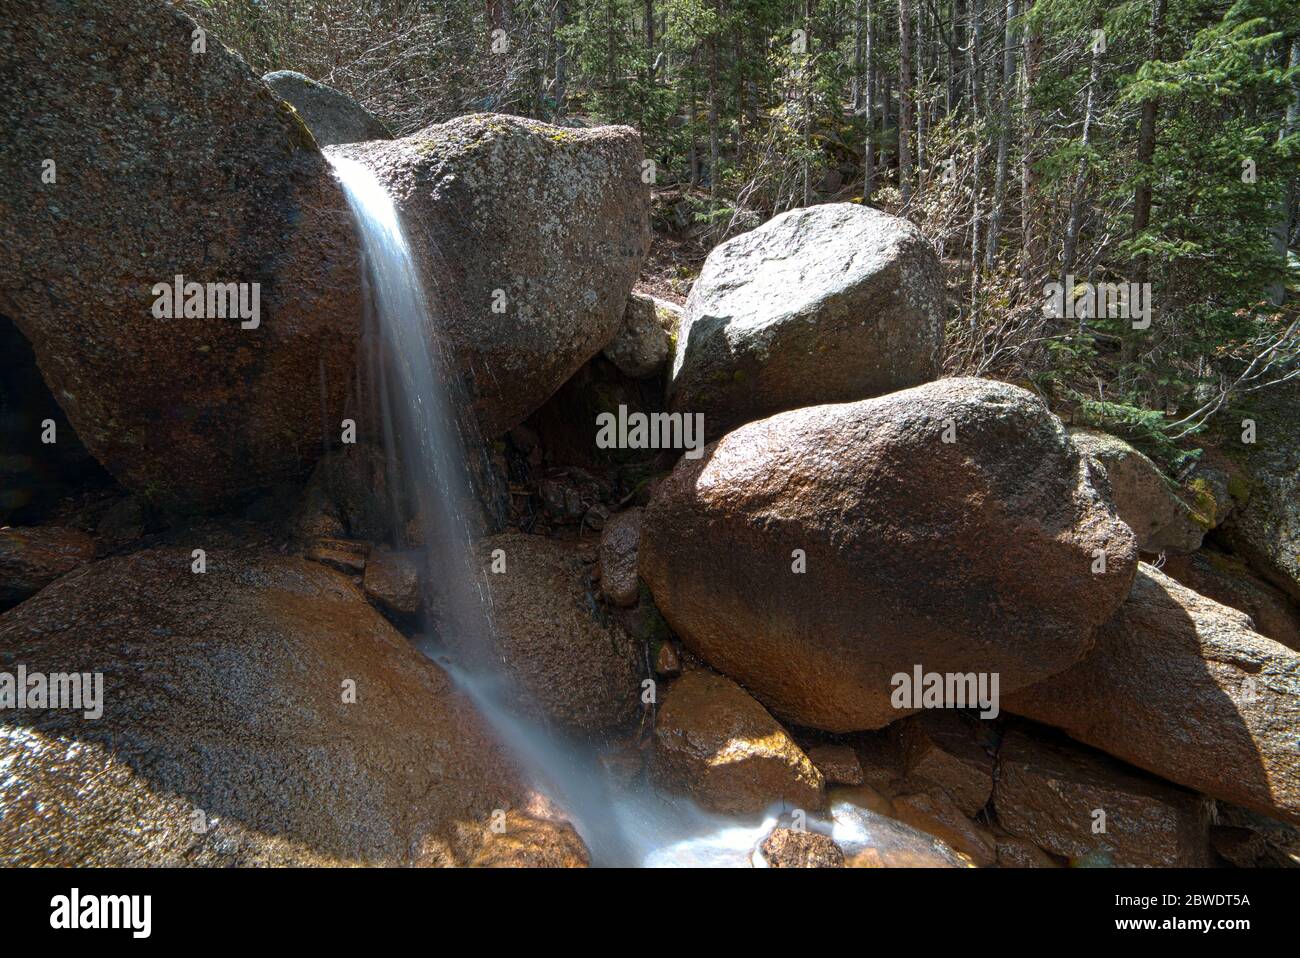 Cascate di Horsethief a Horsethief Falls Trail, Pike National Forest, divide, Colorado, Long Exposure Waterfall foto Foto Stock